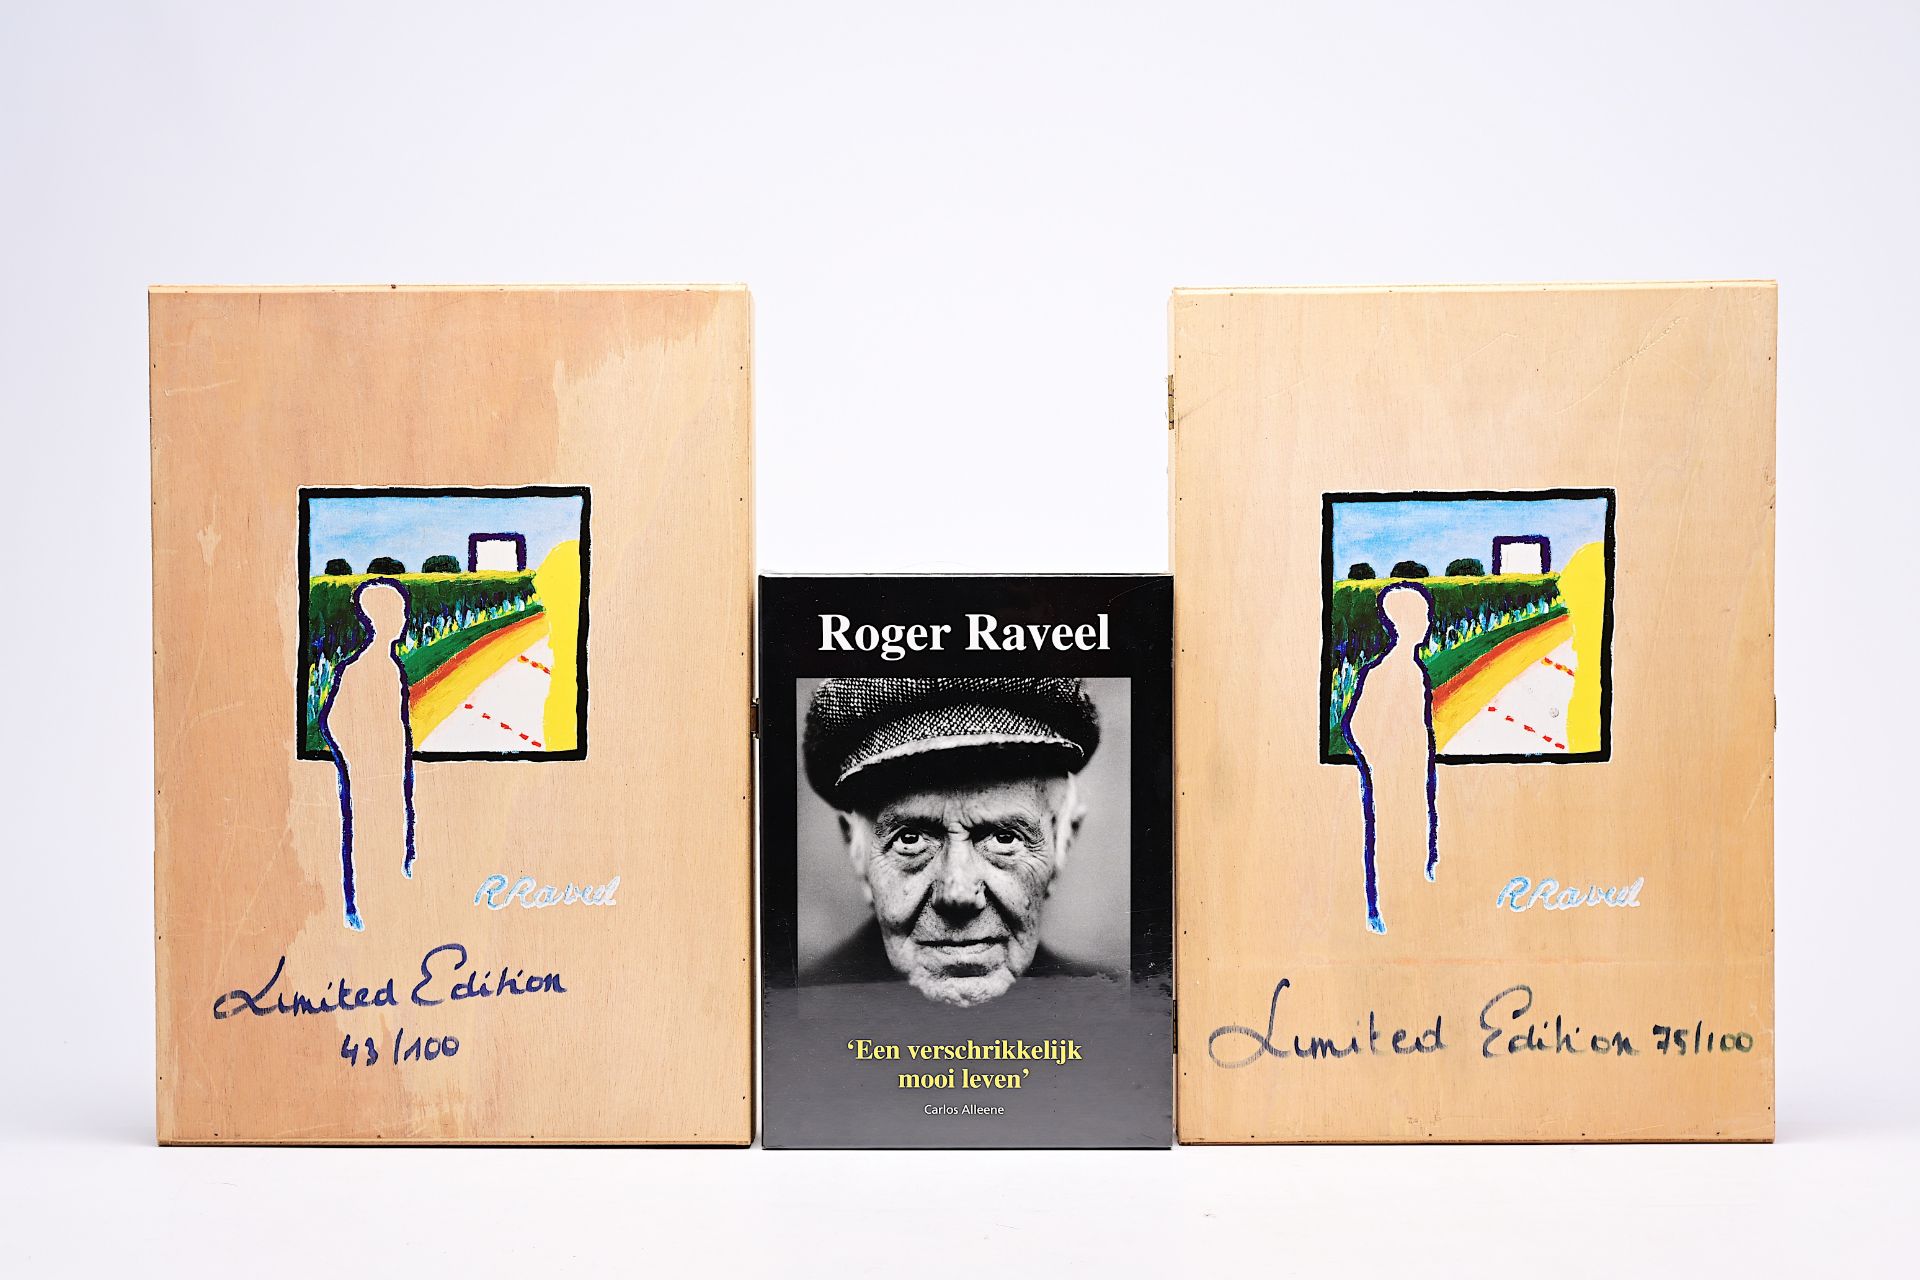 Roger Raveel (1921-2013): Two boxes of wine (eight bottles), ed. 43/100 and 75/100, and a publicatio - Image 2 of 10